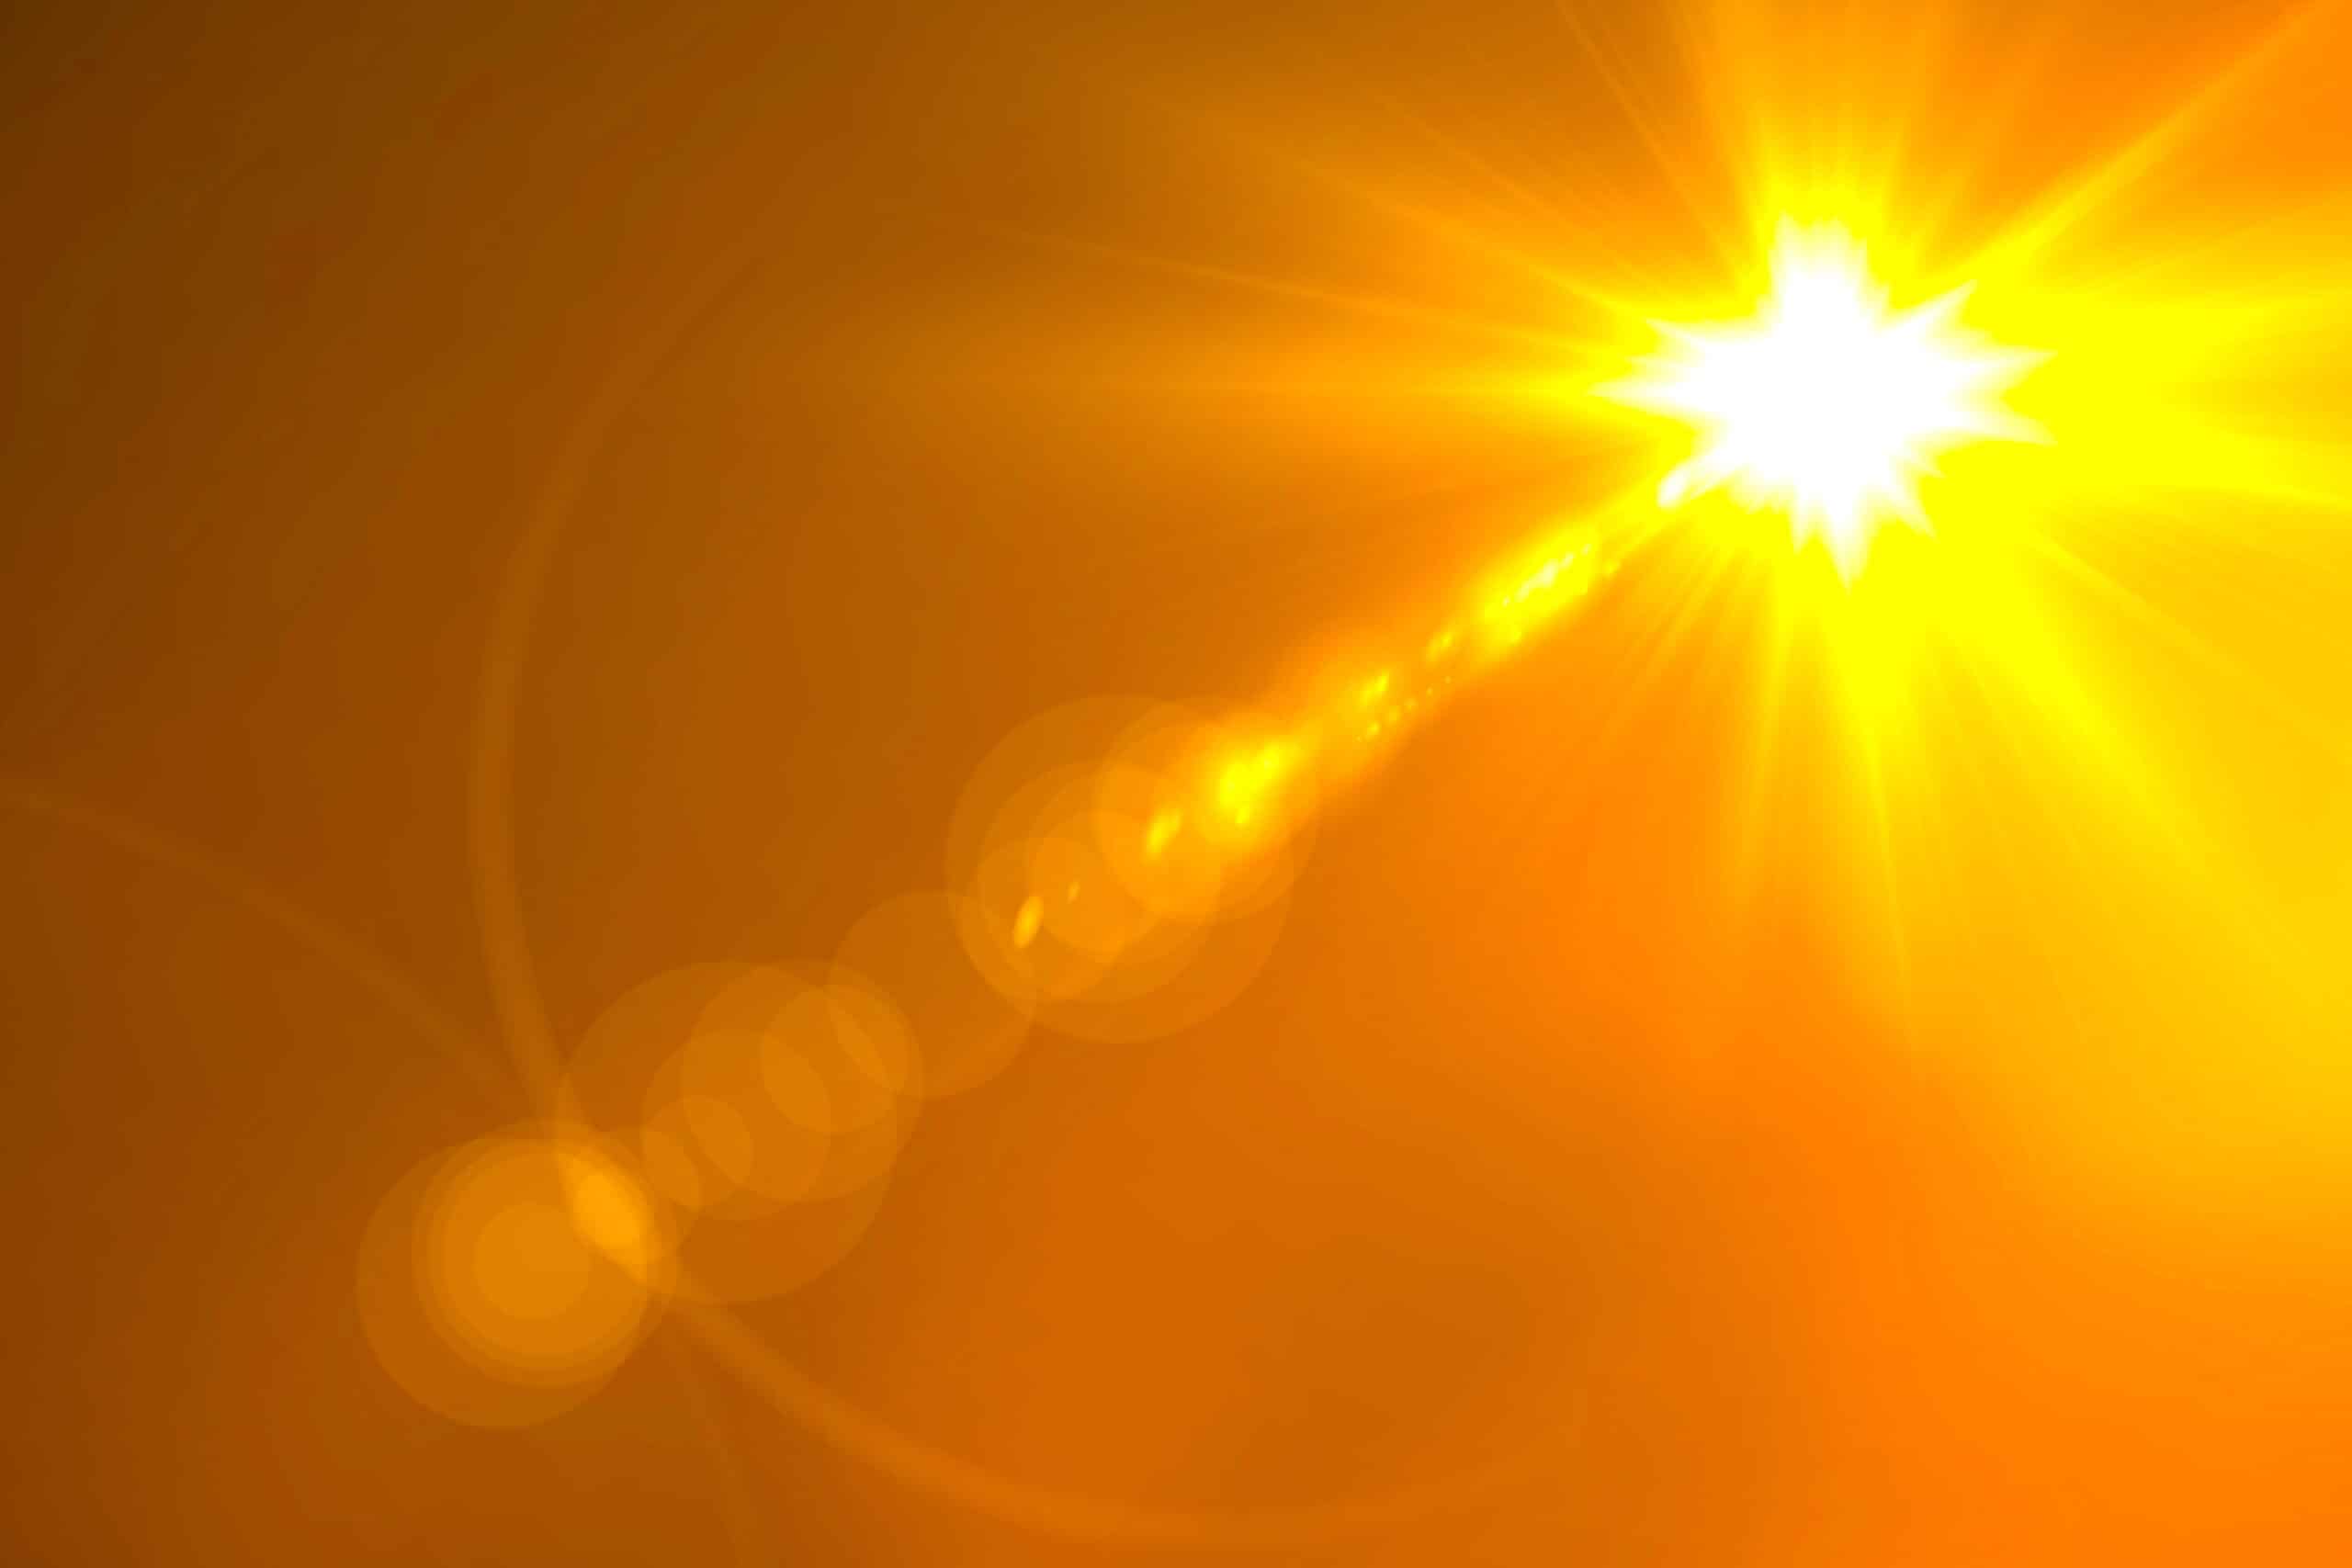 A bright sun shows in a brilliant orange and yellow sky with yellow rays and lens flare artifacts emphasizing Type UVUA conduit jacket resistance to prolonged UV sunlight exposure.